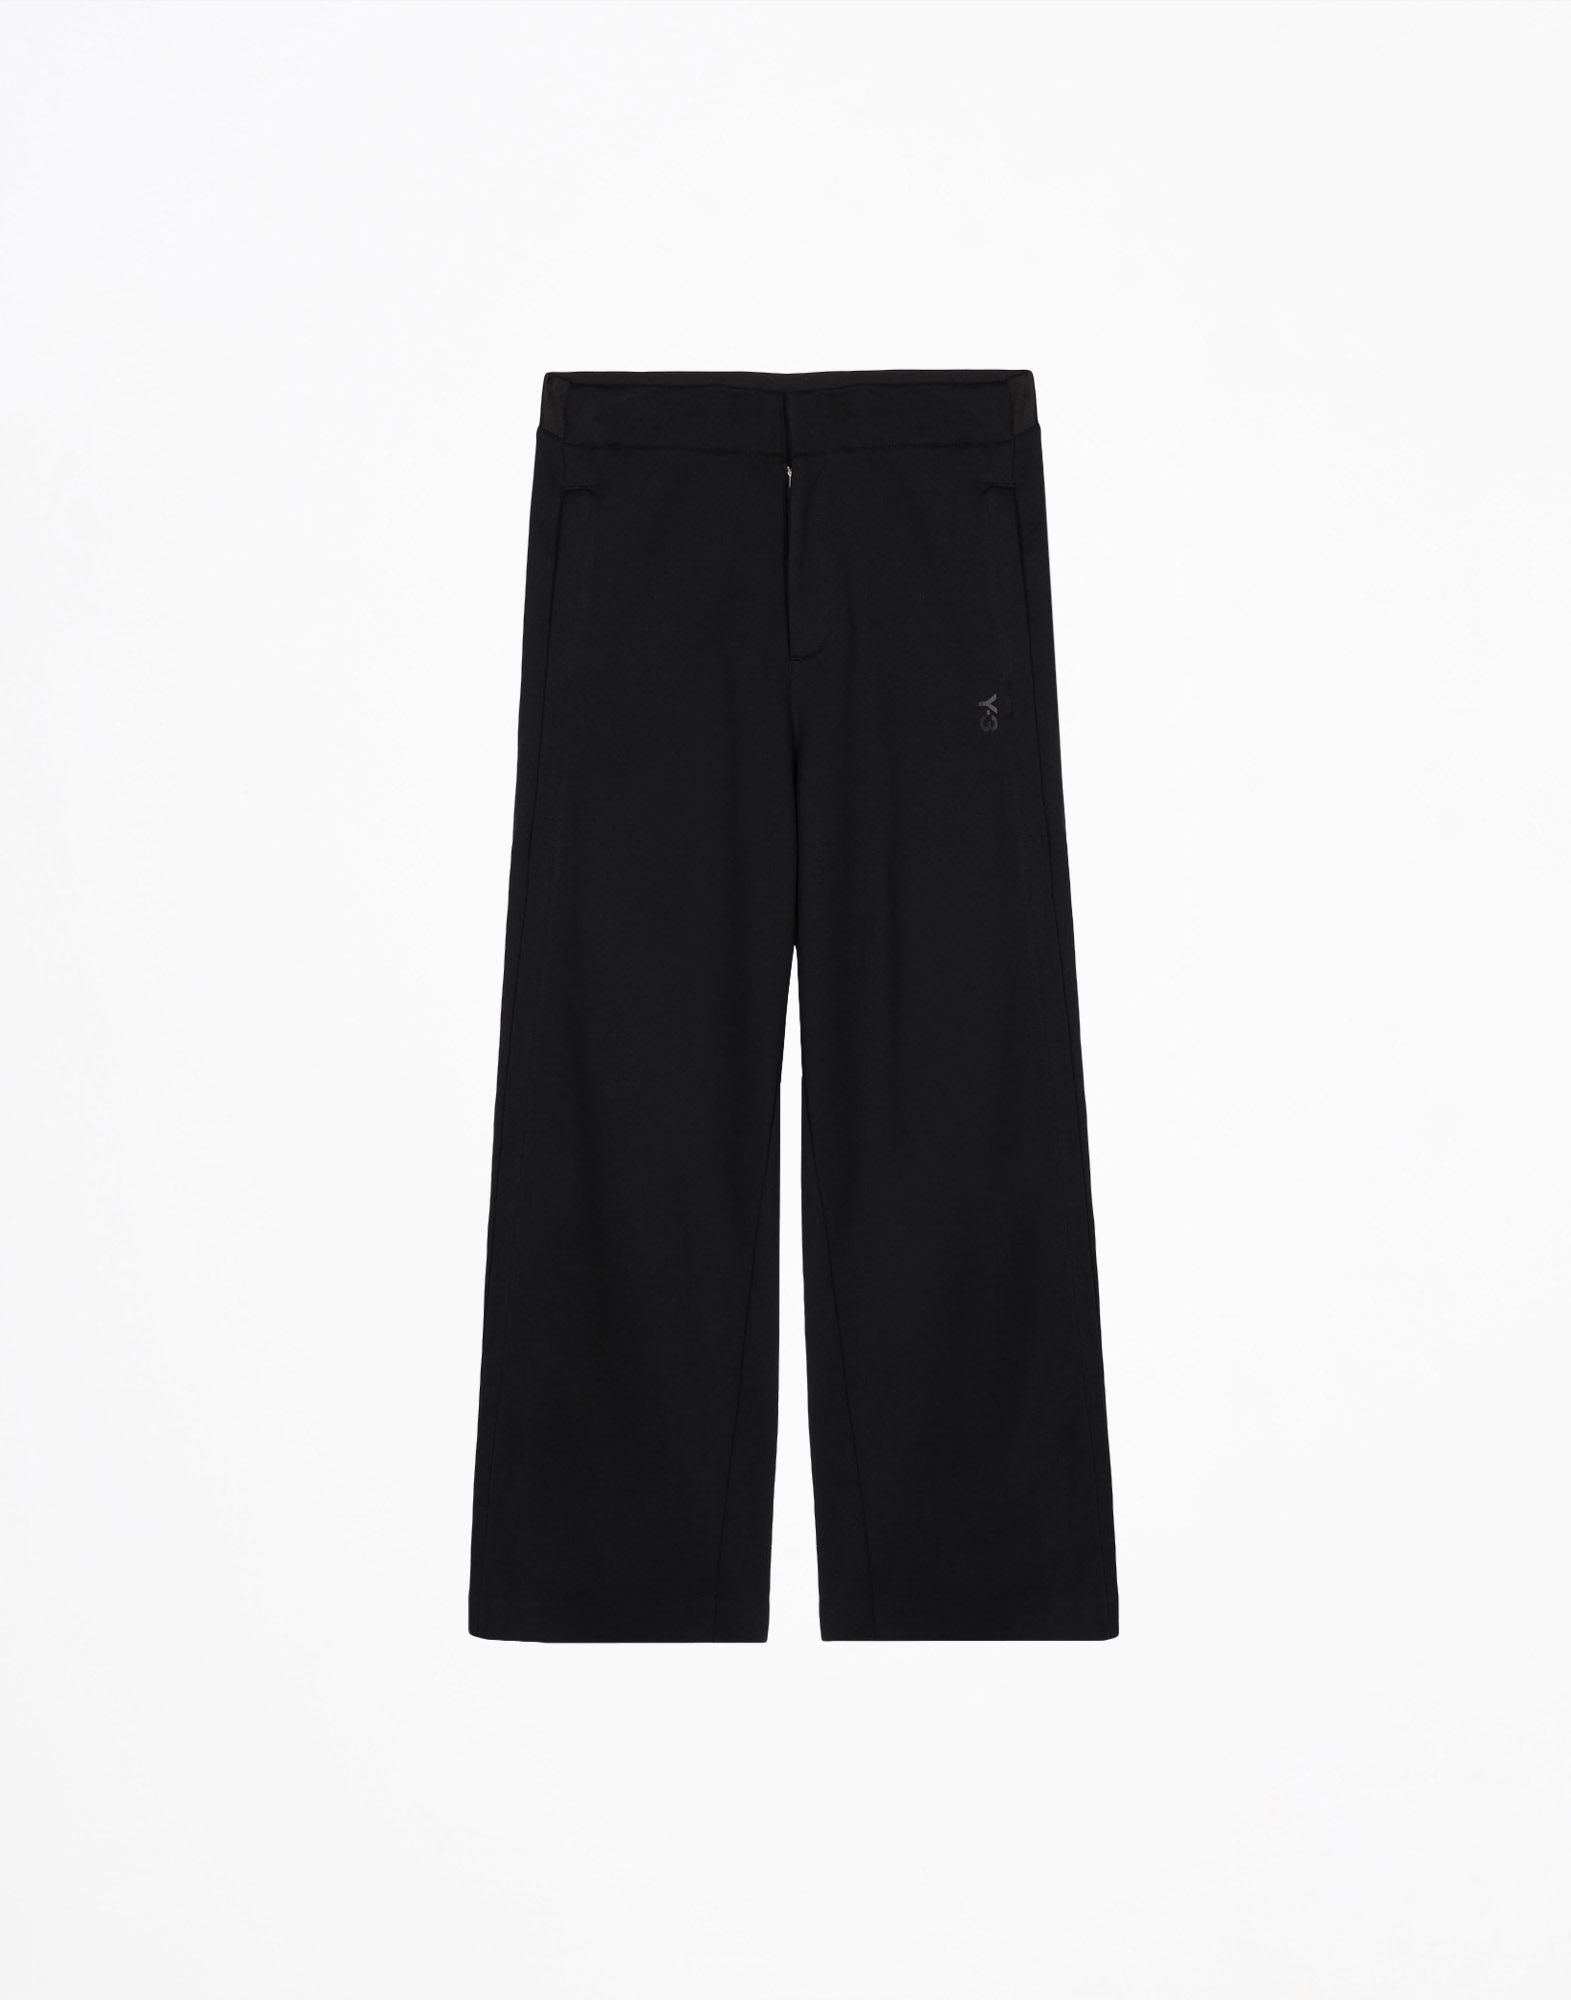 Y 3 FROST PANT for Women | Adidas Y-3 Official Store